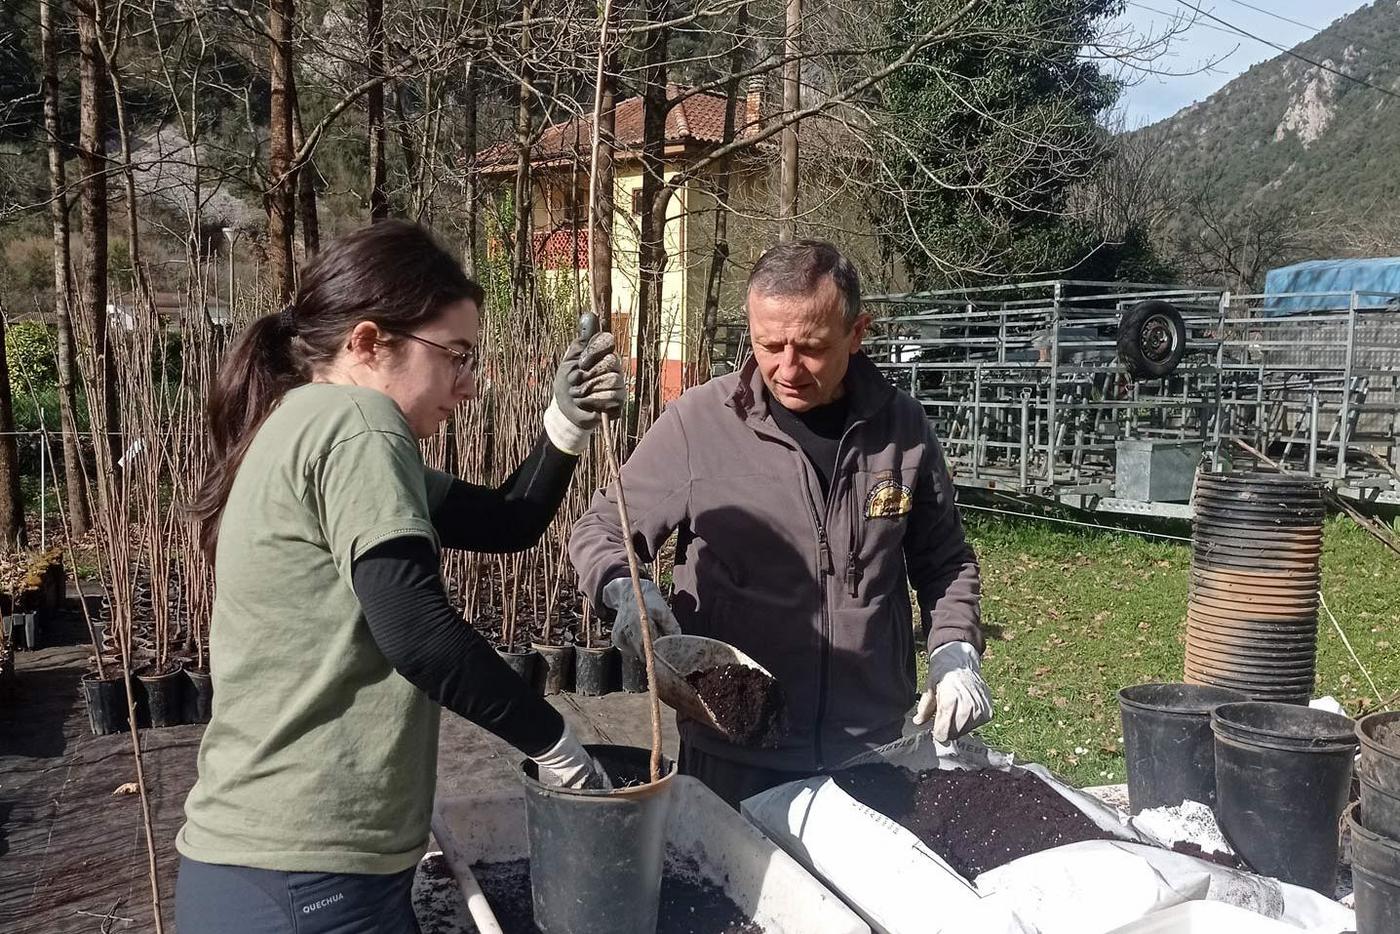 Fapas employee Monchu Magadan prepares fruit trees for planting with volunteers (Plantaciones Gourmet campaign). The aim is to keep bears away from settlements in the province of León and avoid conflicts with the local population.